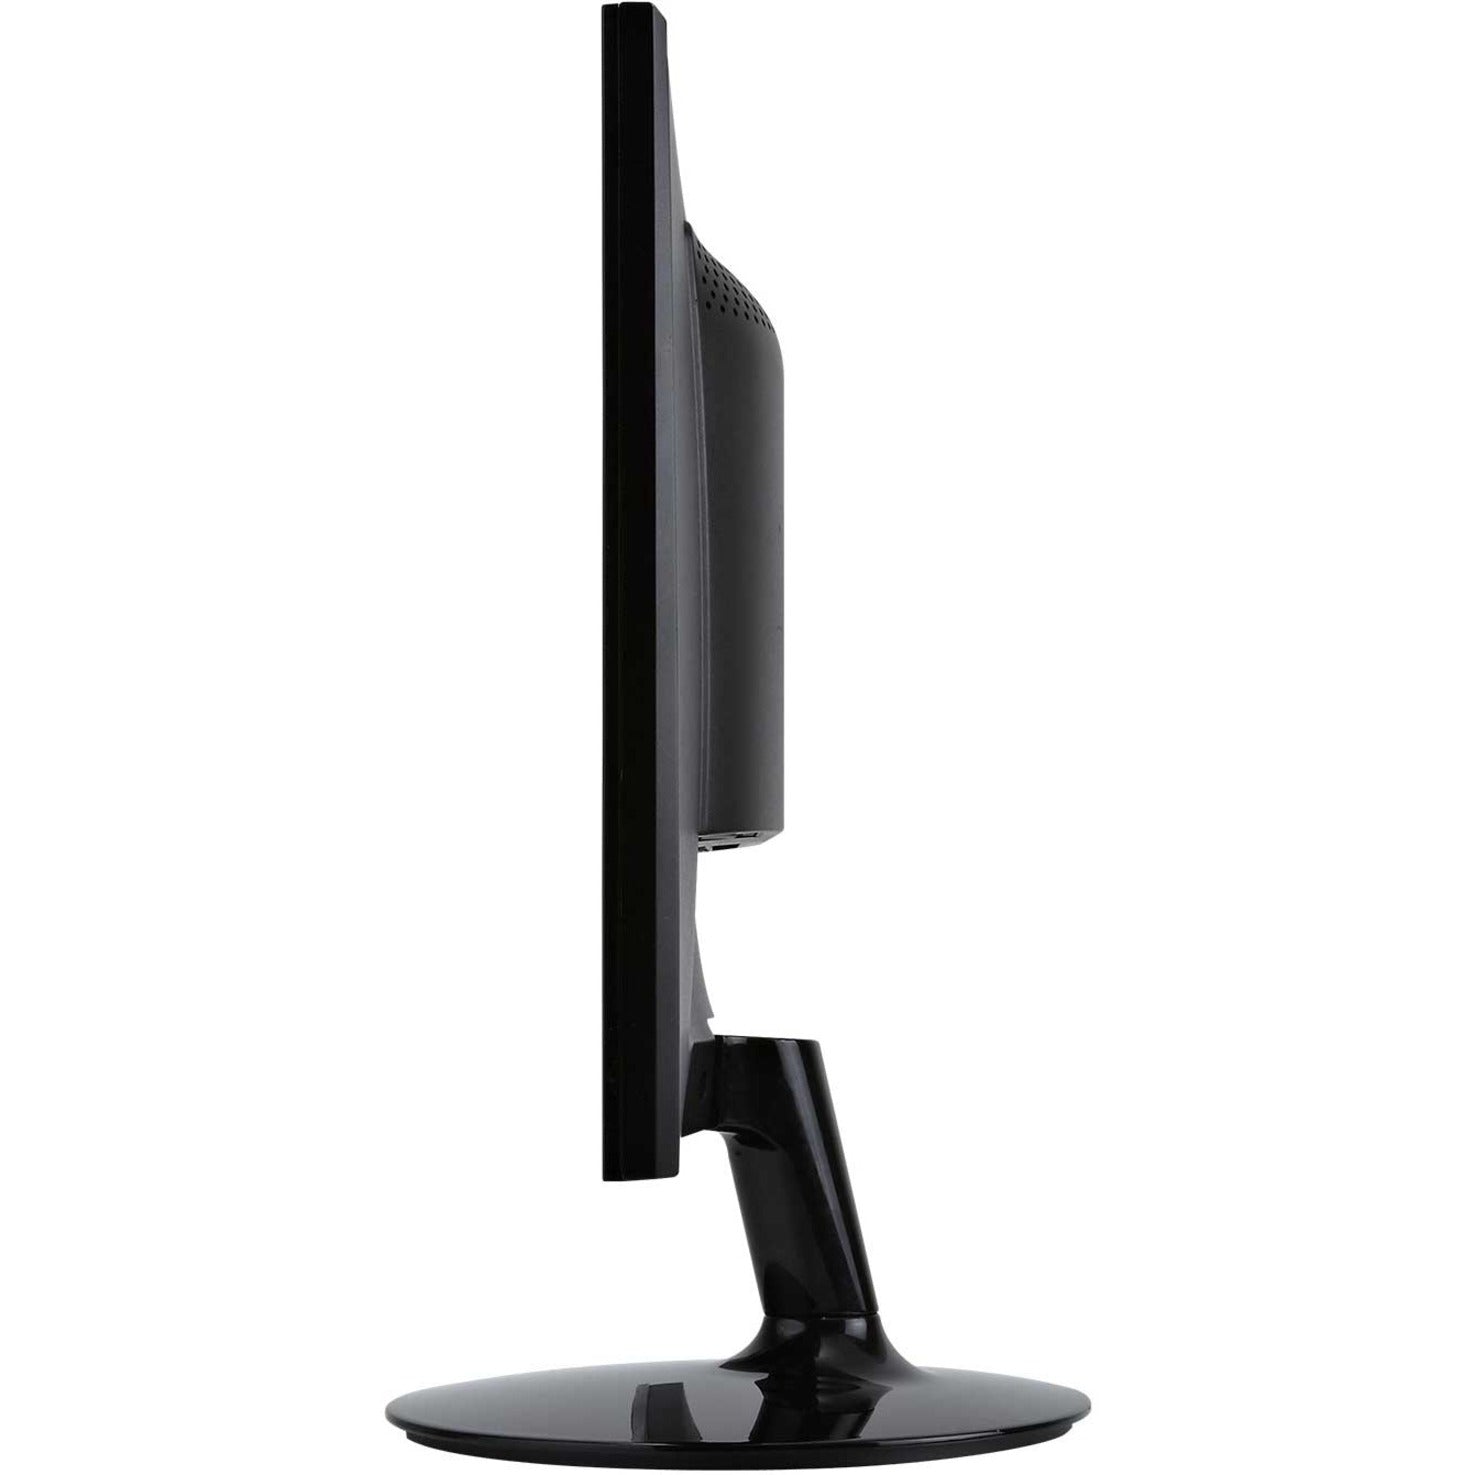 ViewSonic VX2252MH Widescreen LCD Monitor, Full HD, 2ms Response Time, Built-in Speakers